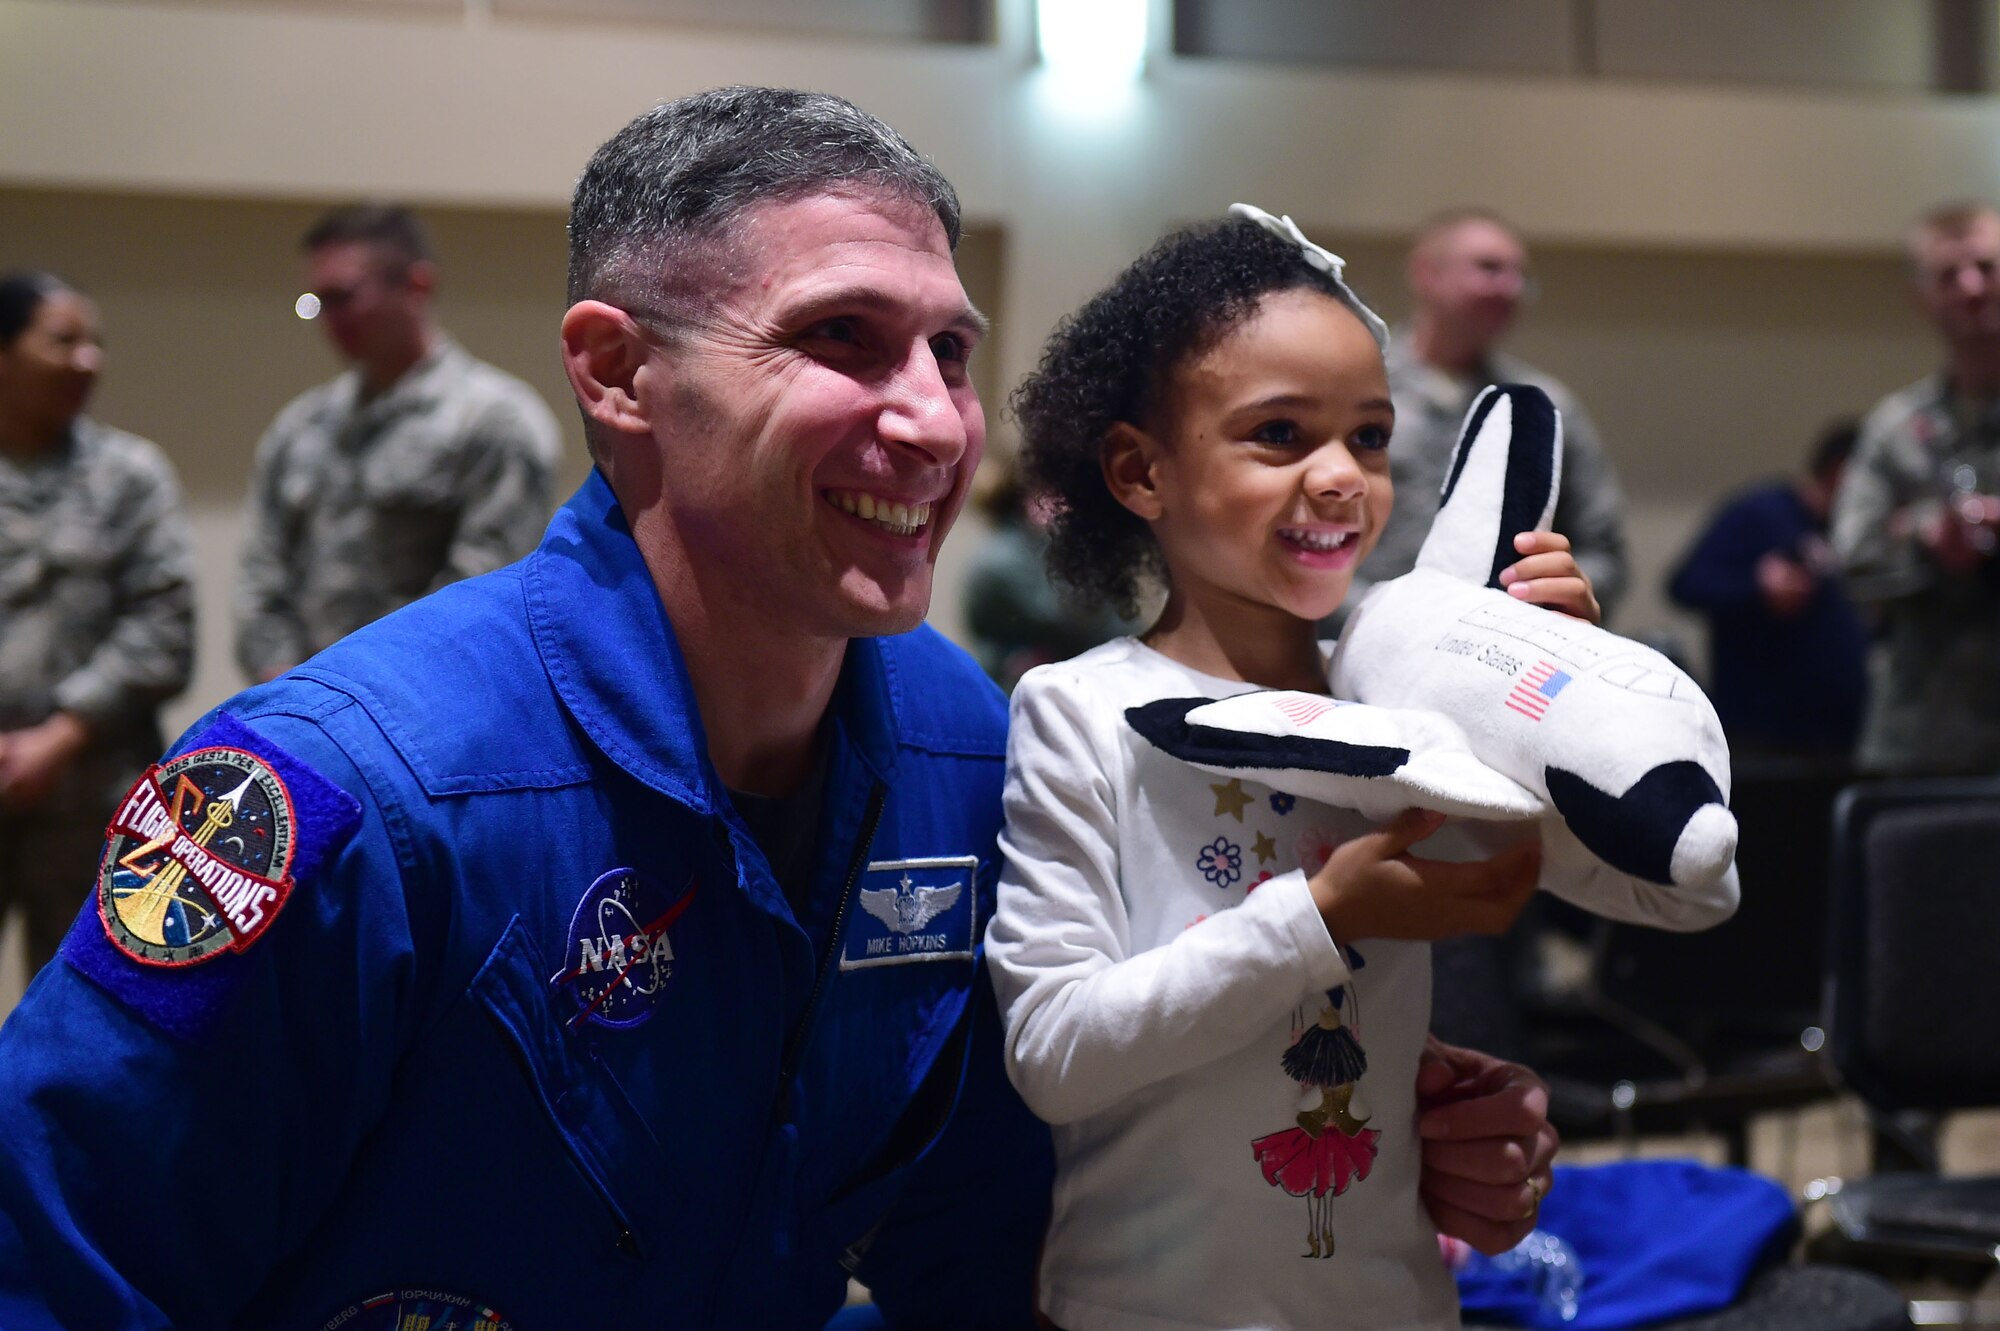 Col. Michael S. Hopkins, astronaut, Air Force National Aeronautics Space Agency, takes a photo with a child the Leadership Development Center, Buckley Air Force Base, Colo., Jan. 8, 2018. The child was upset she was unable to ask Hopkins a question during his presentation so he took time after to take a photo and speak with the little girl about being an astronaut. (U.S. Air Force photo by Senior Airman Luke W. Nowakowski)